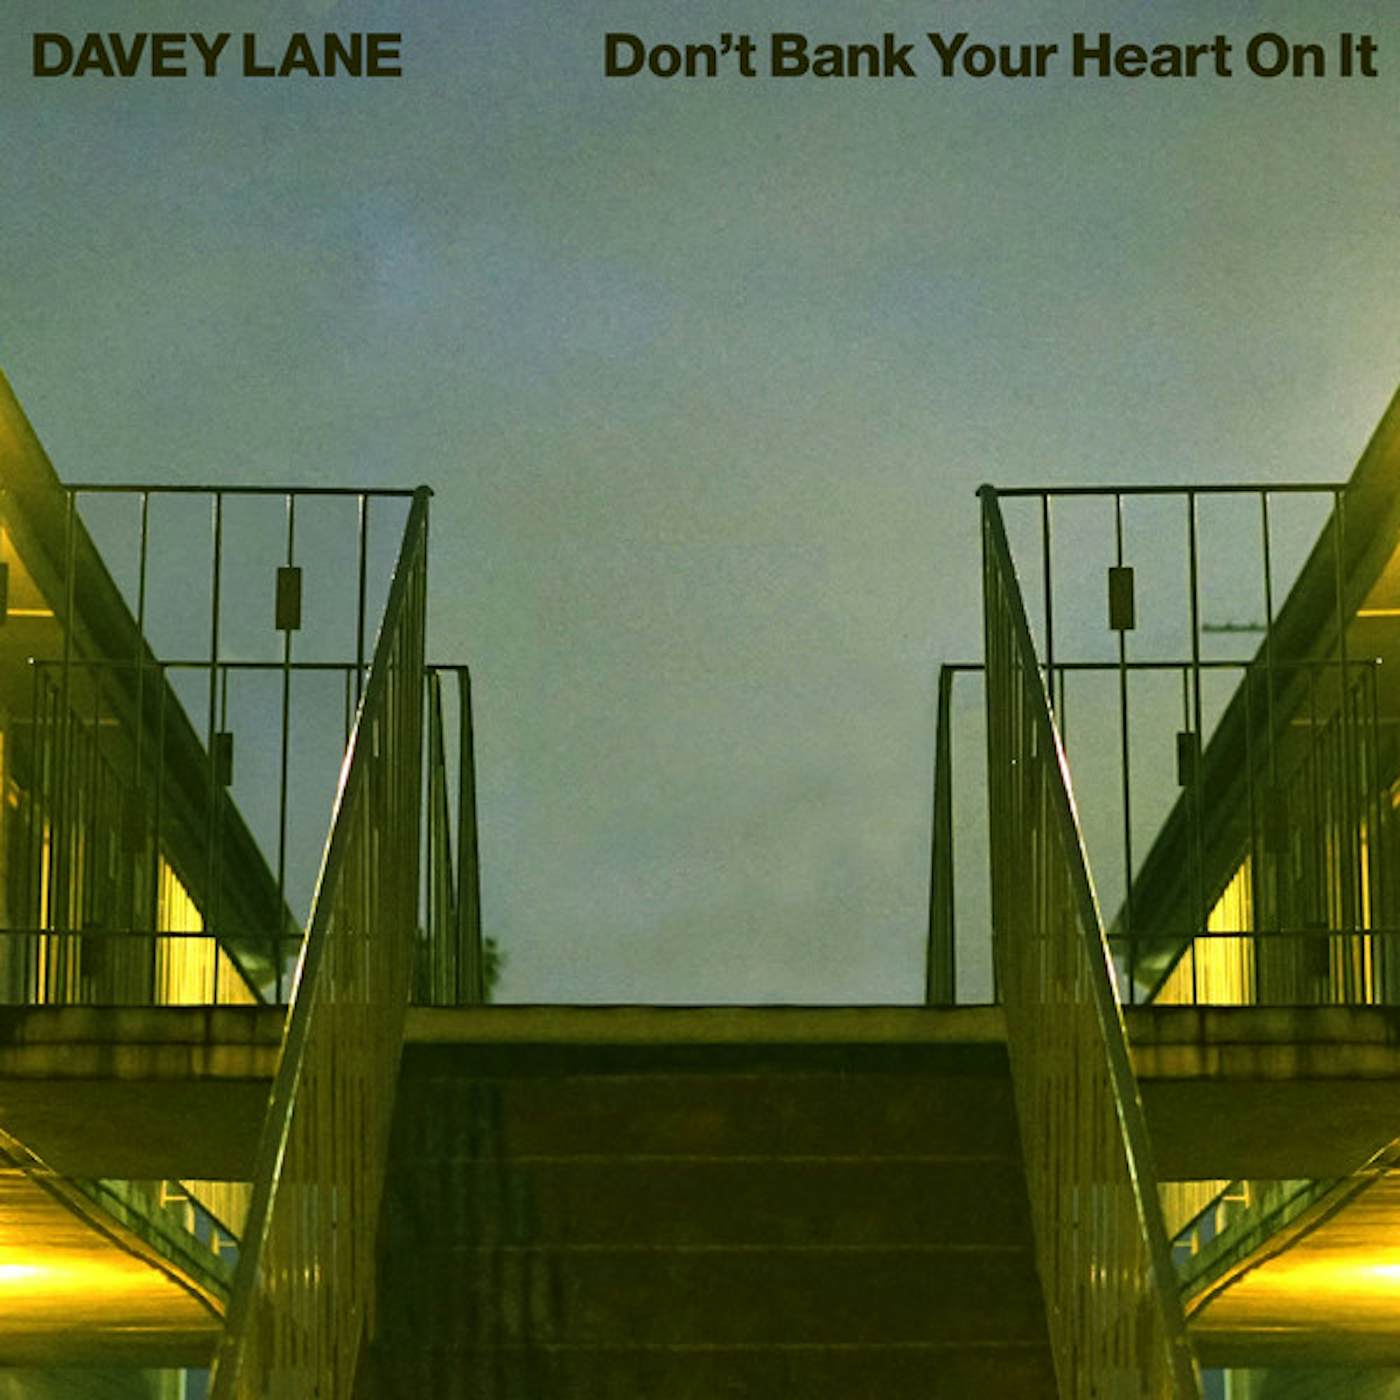 Davey Lane Don't Bank Your Heart On It Vinyl Record